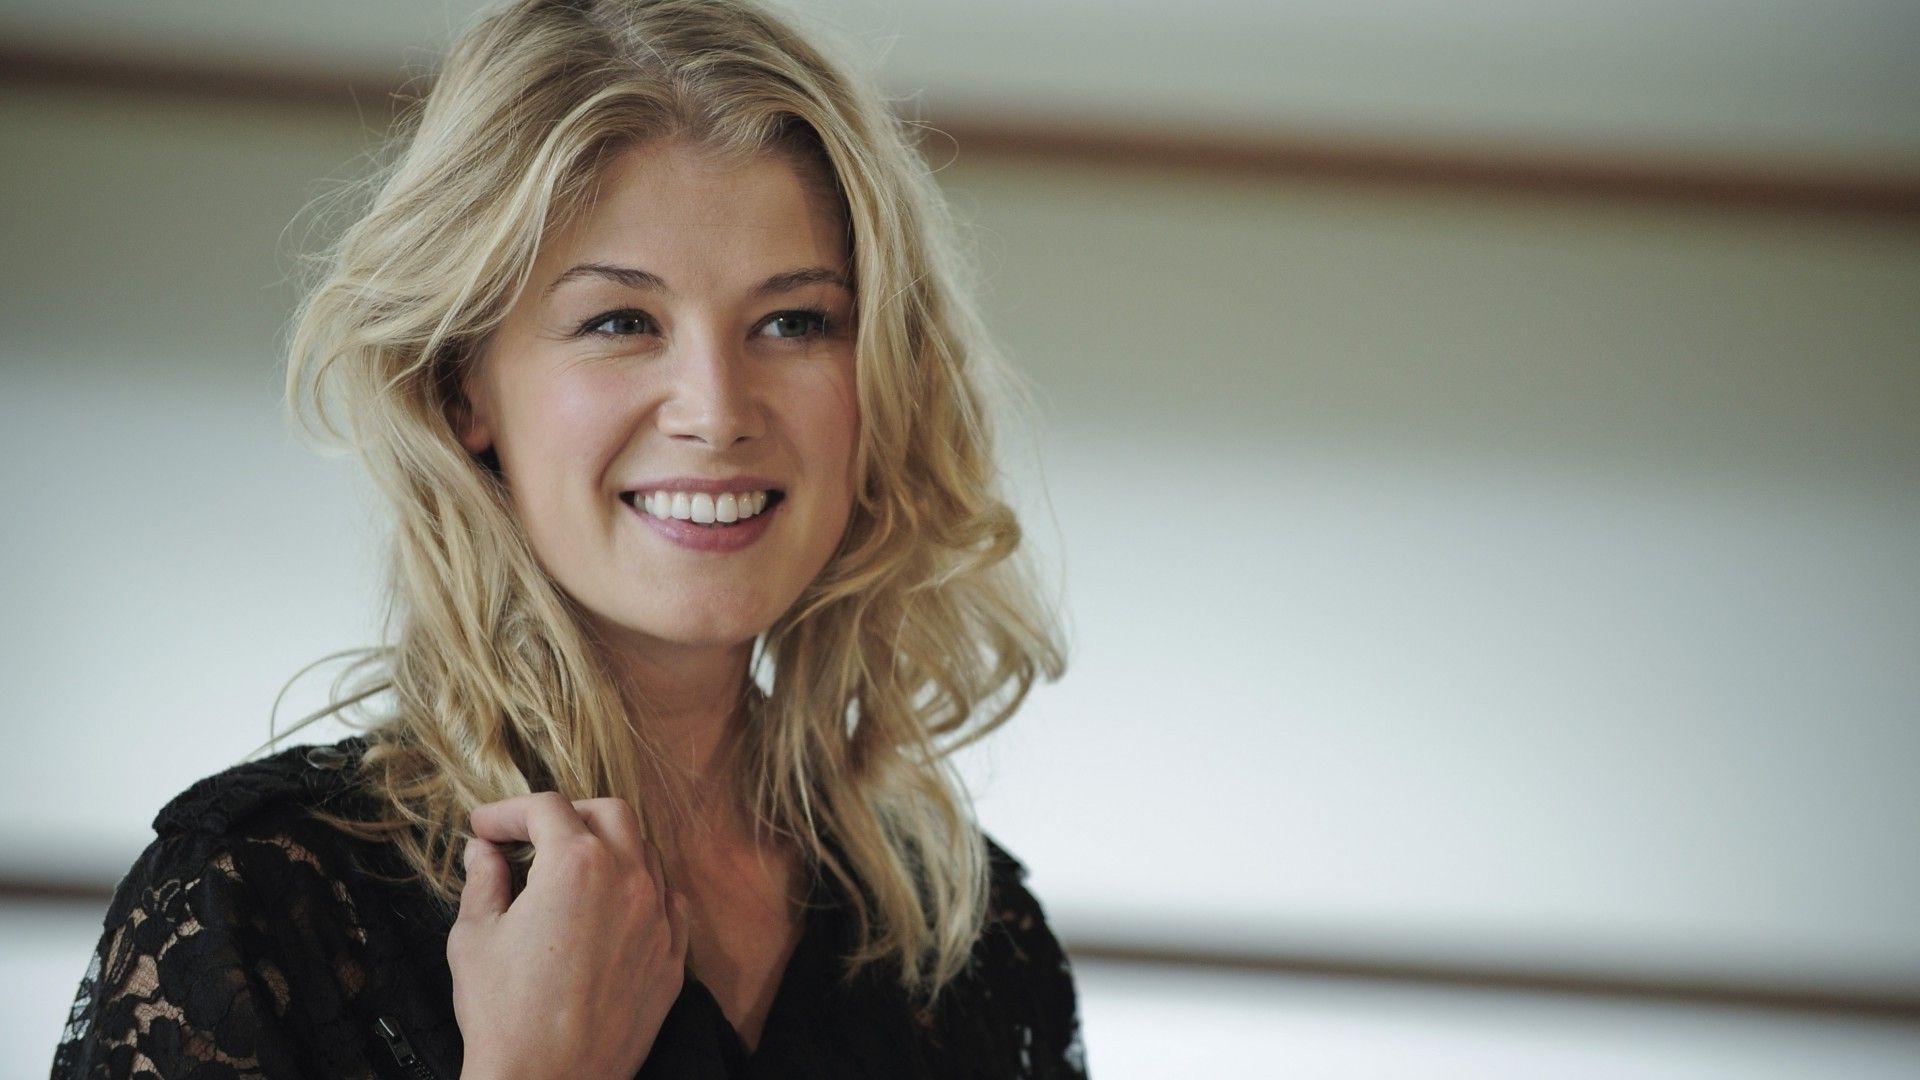 Rosamund Pike Wallpaper High Resolution and Quality Download